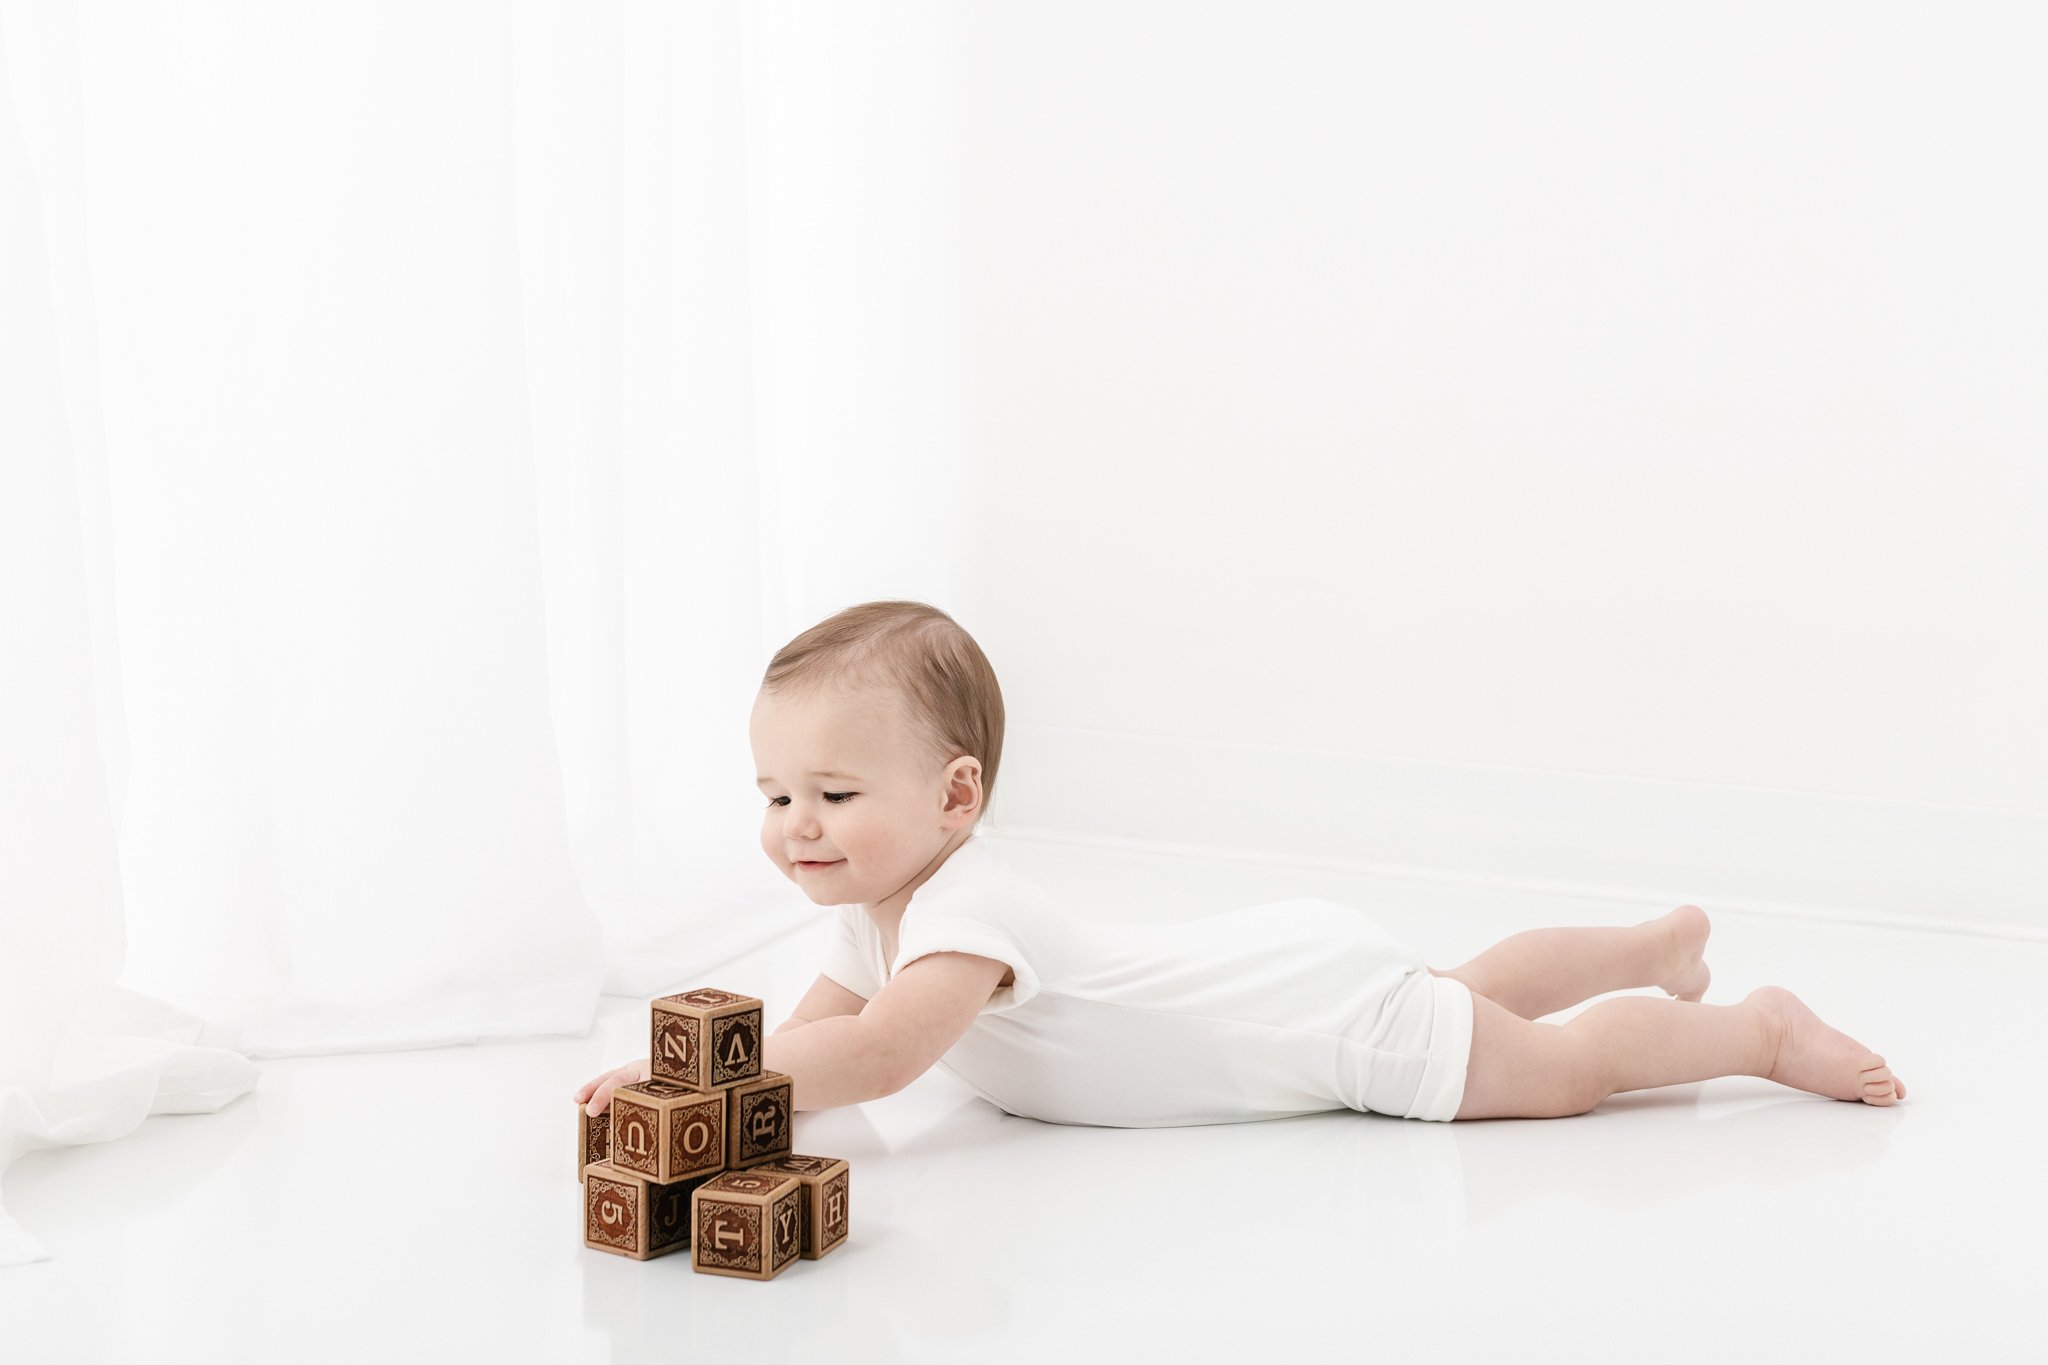  During a first birthday portrait aa little boy plays with a pile of blocks with Nicole Hawkins Photography. first birthday portraits at a studio children studio portraits #NicoleHawkinsPhotography #NicoleHawkinsBabies #FirstBirthdayPhotography #Stud